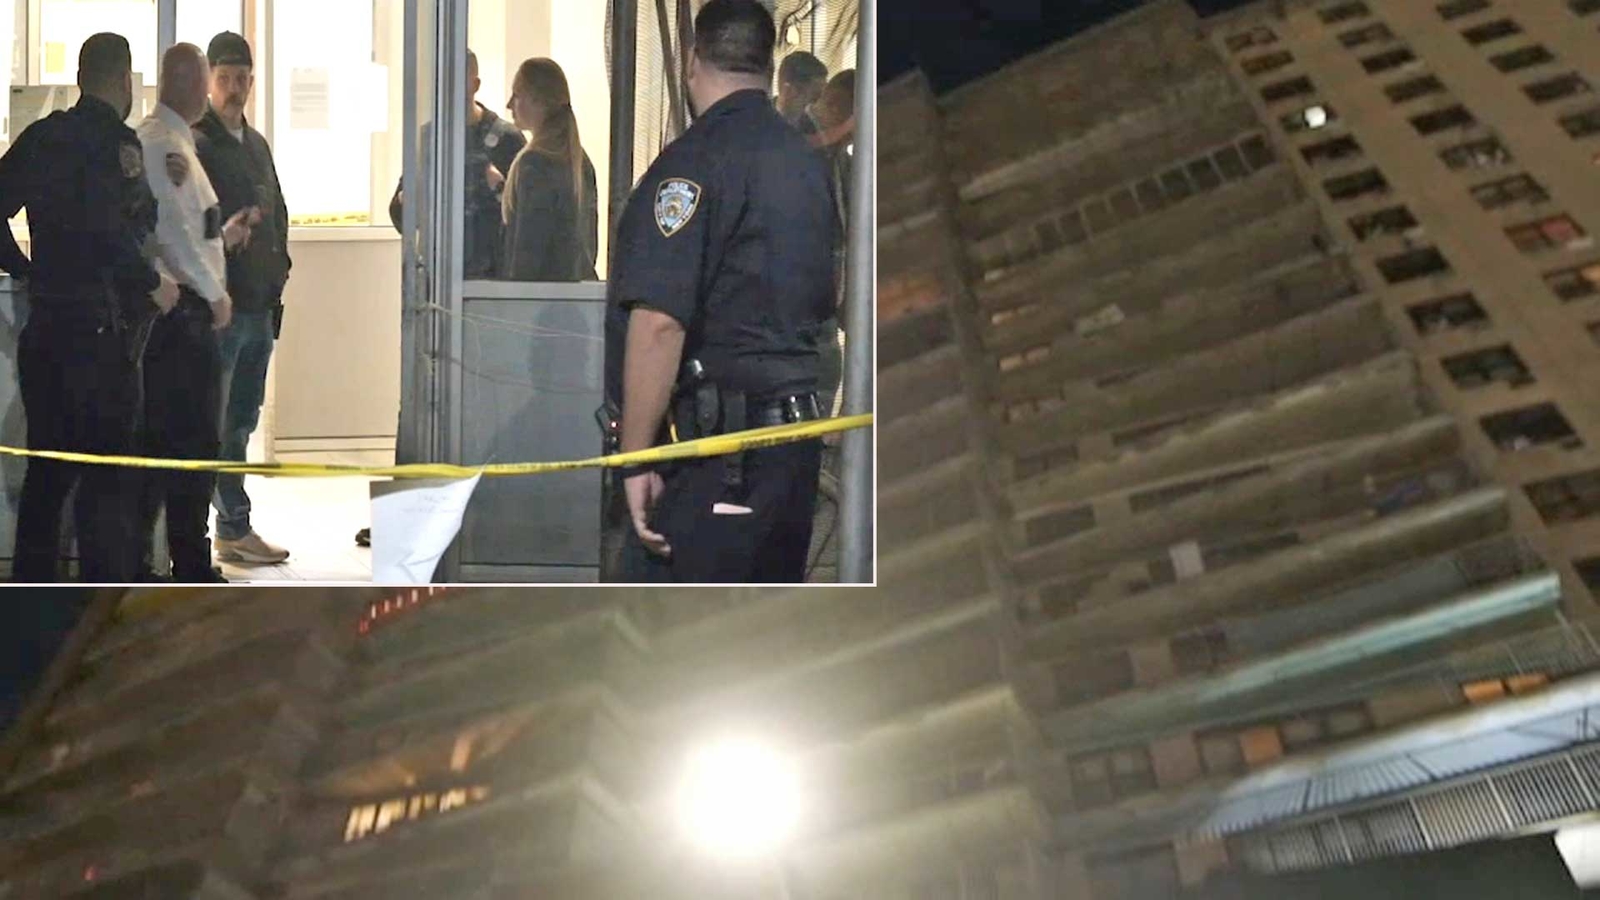 Teenage girl found fatally shot in apartment building in Brooklyn